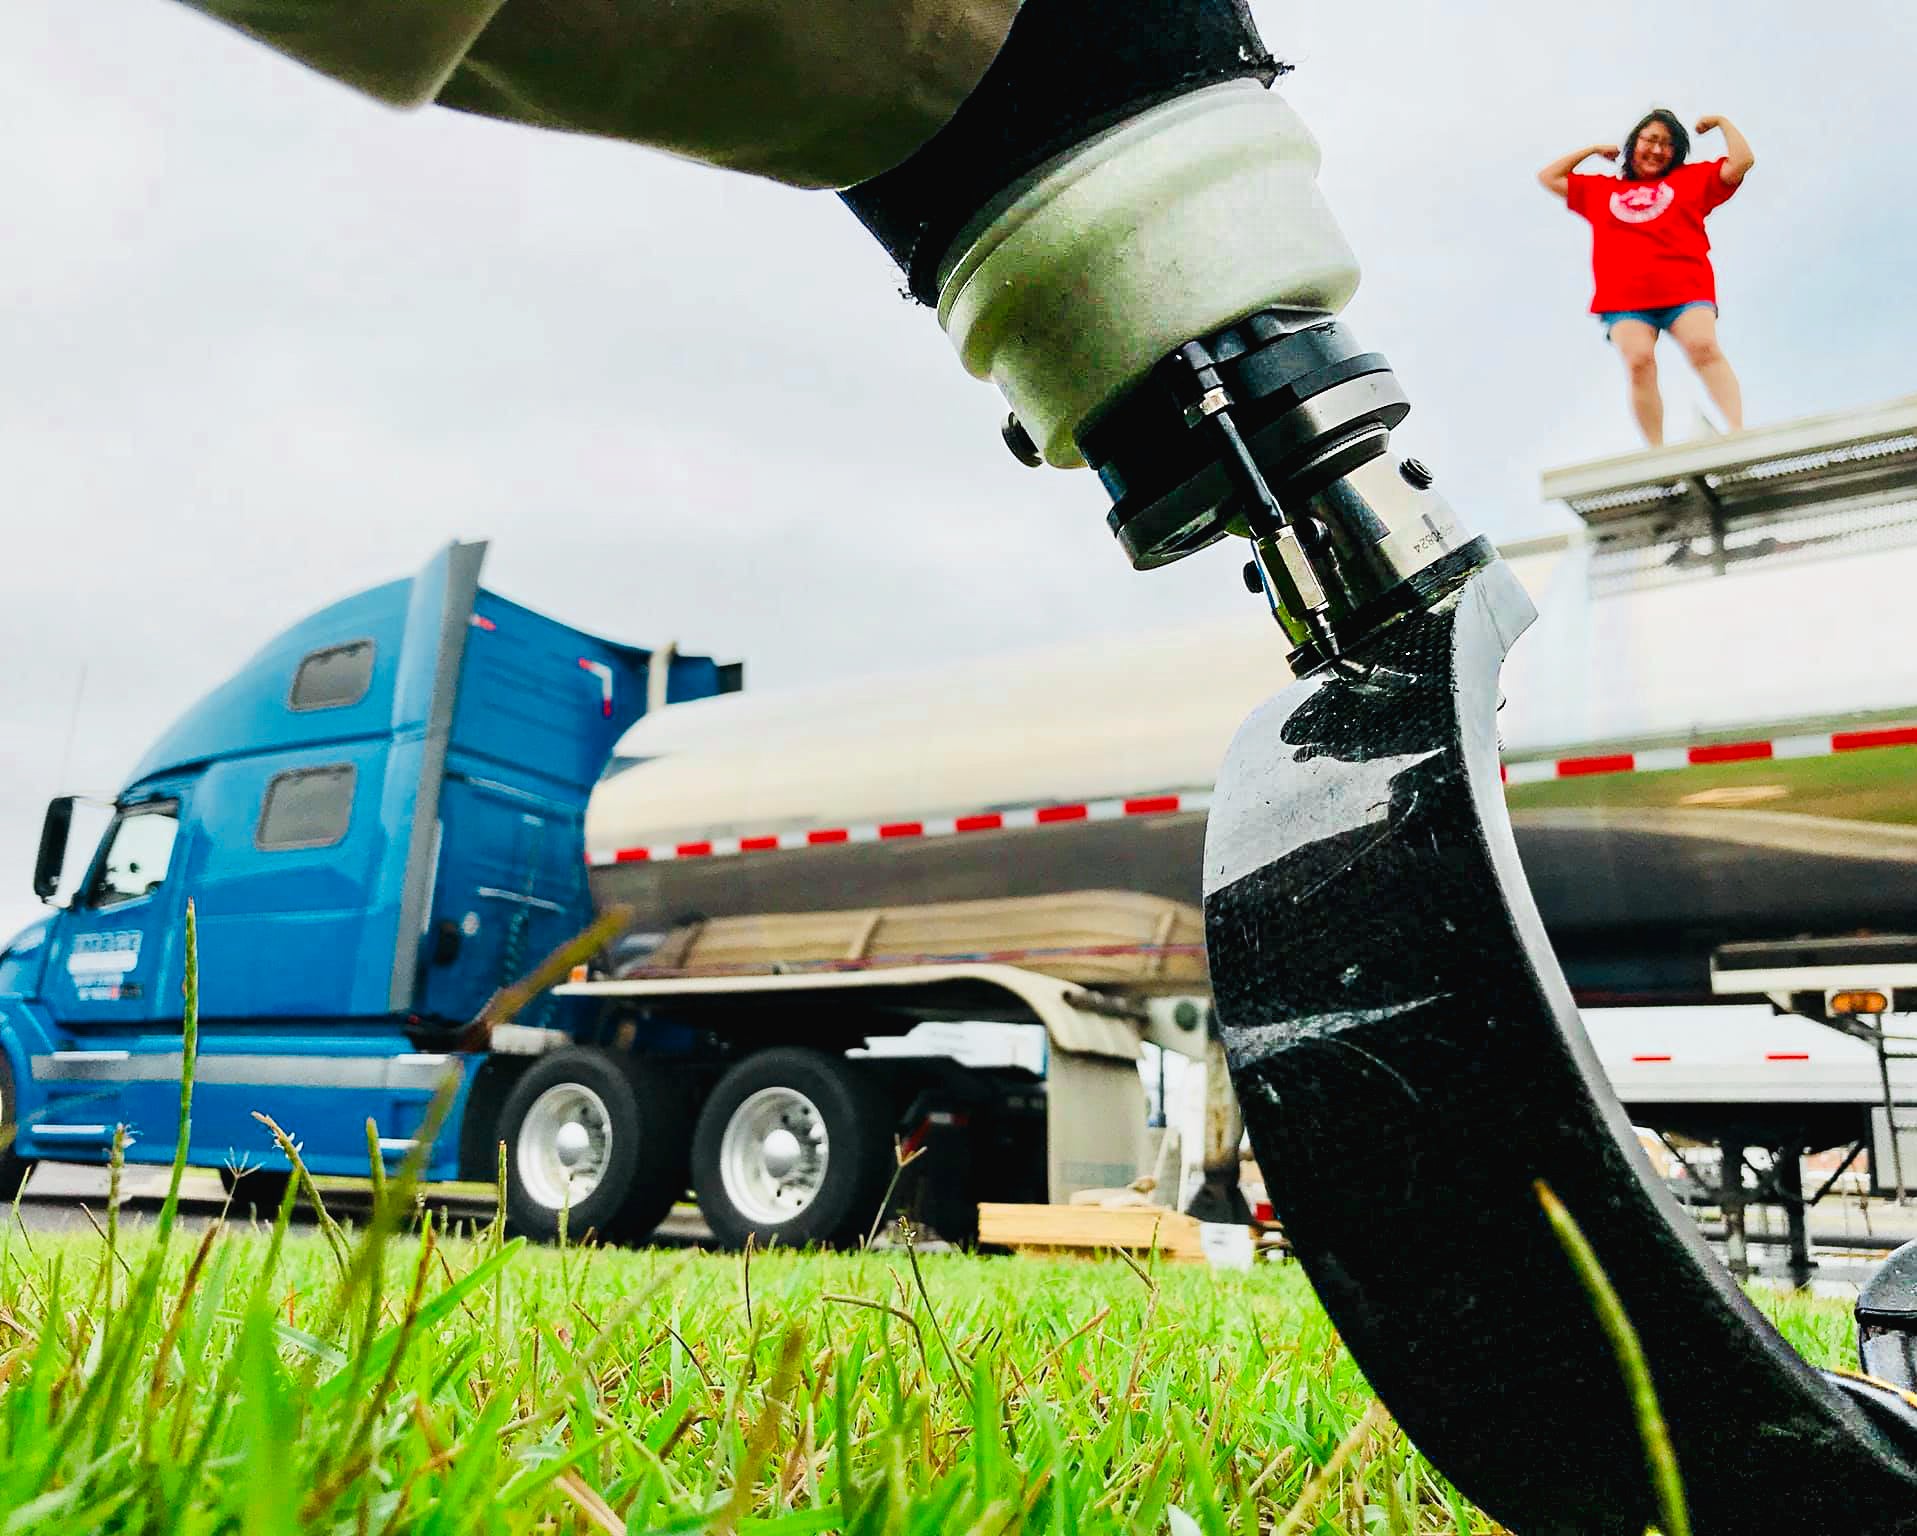 Detail photo of an Amplife® Supporter's prosthetic leg with their companion standing on top of 18 wheeler flexing in the background